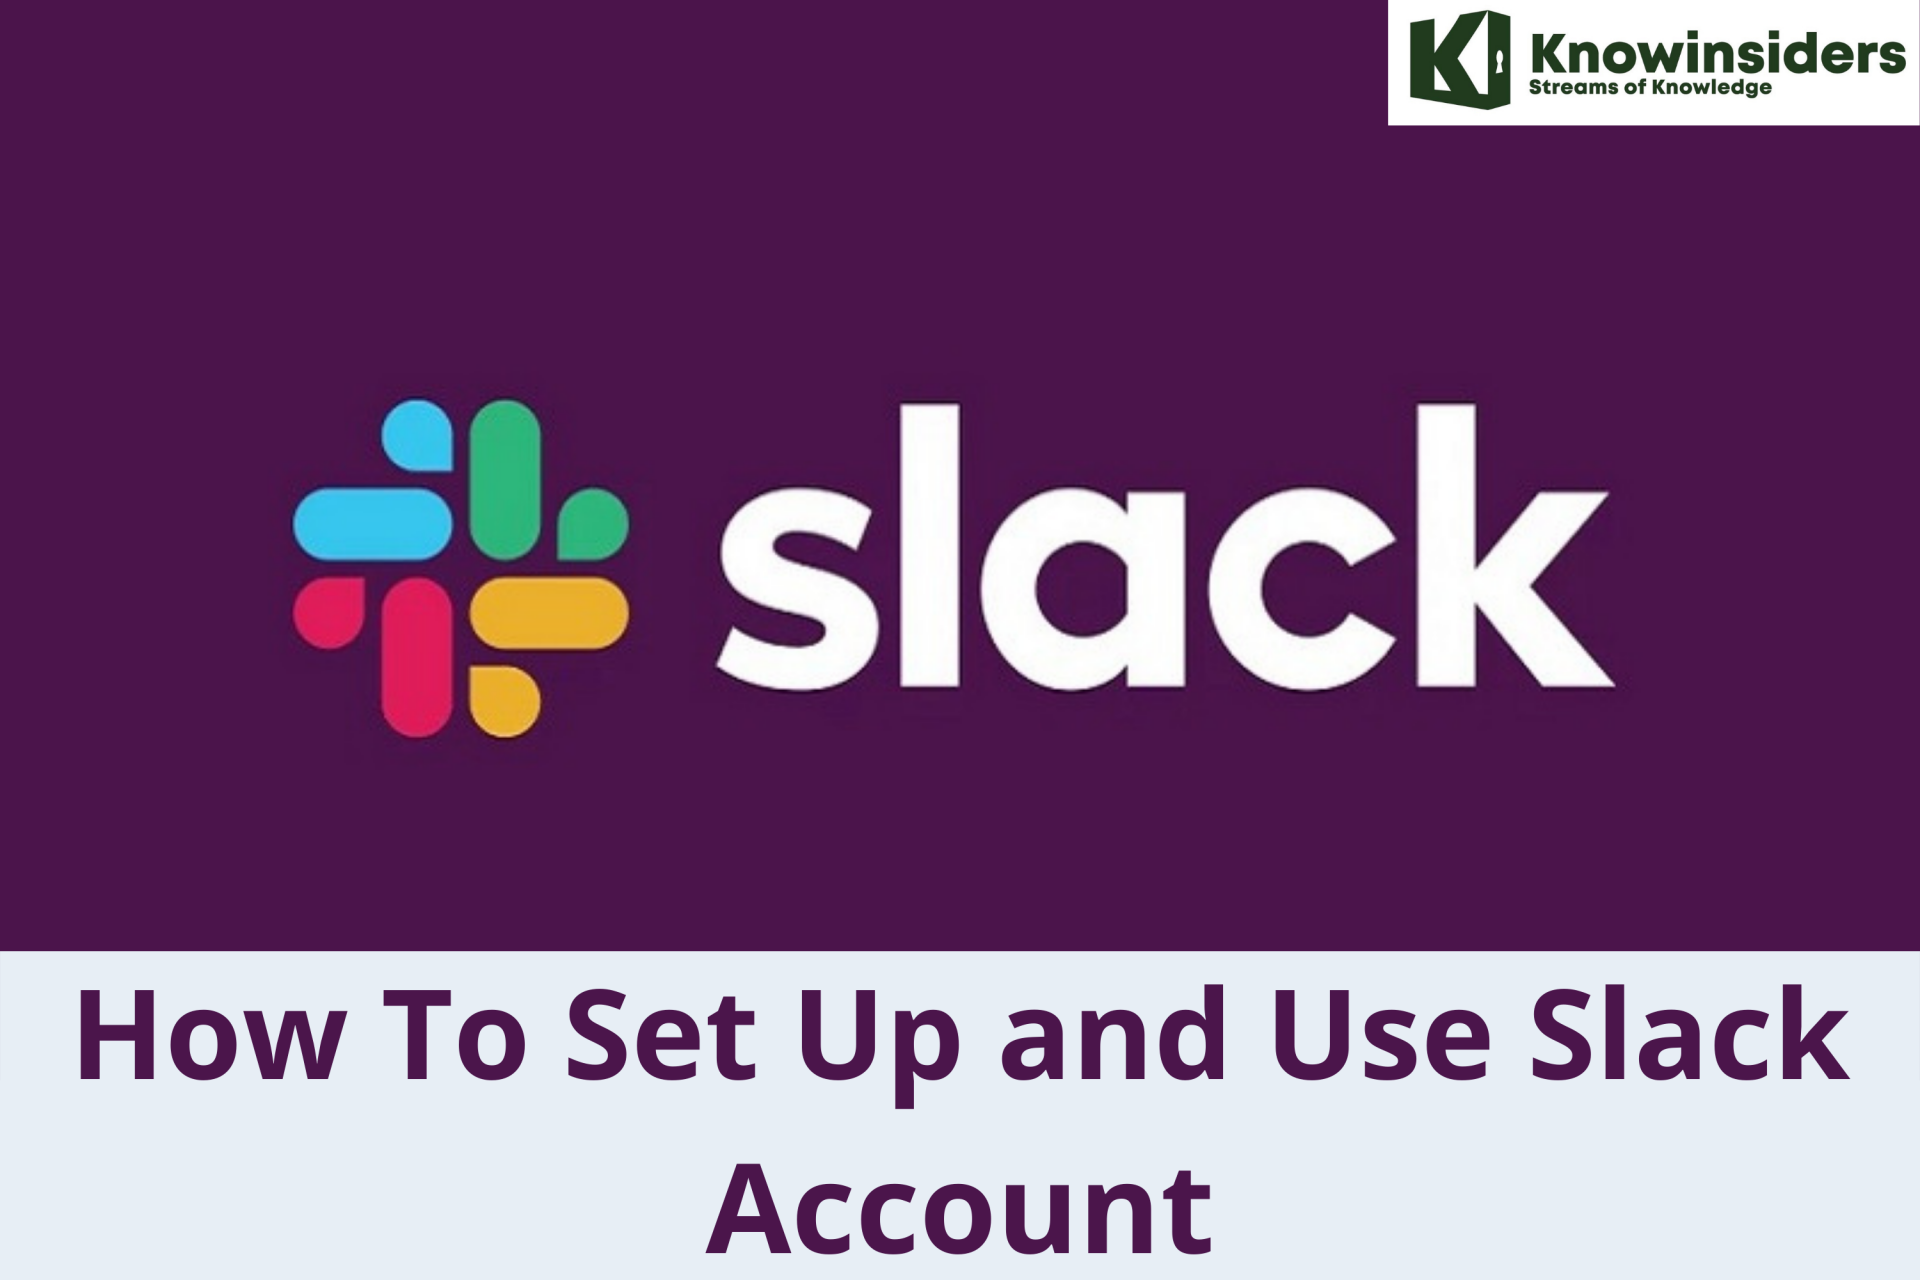 How To Set Up and Use Slack Account